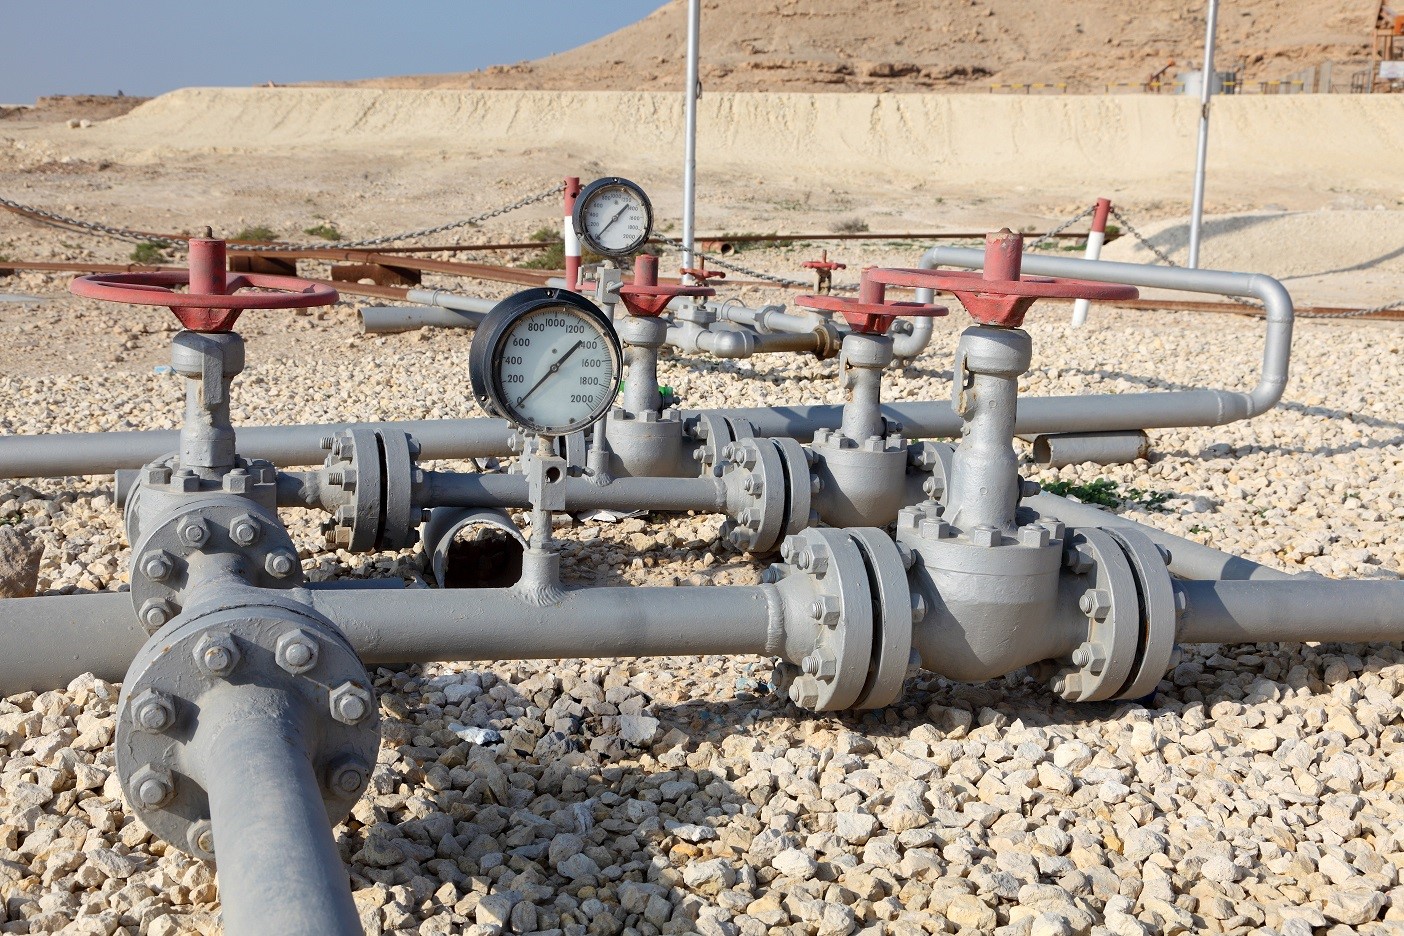 Oil pipes in Bahrain, Middle East